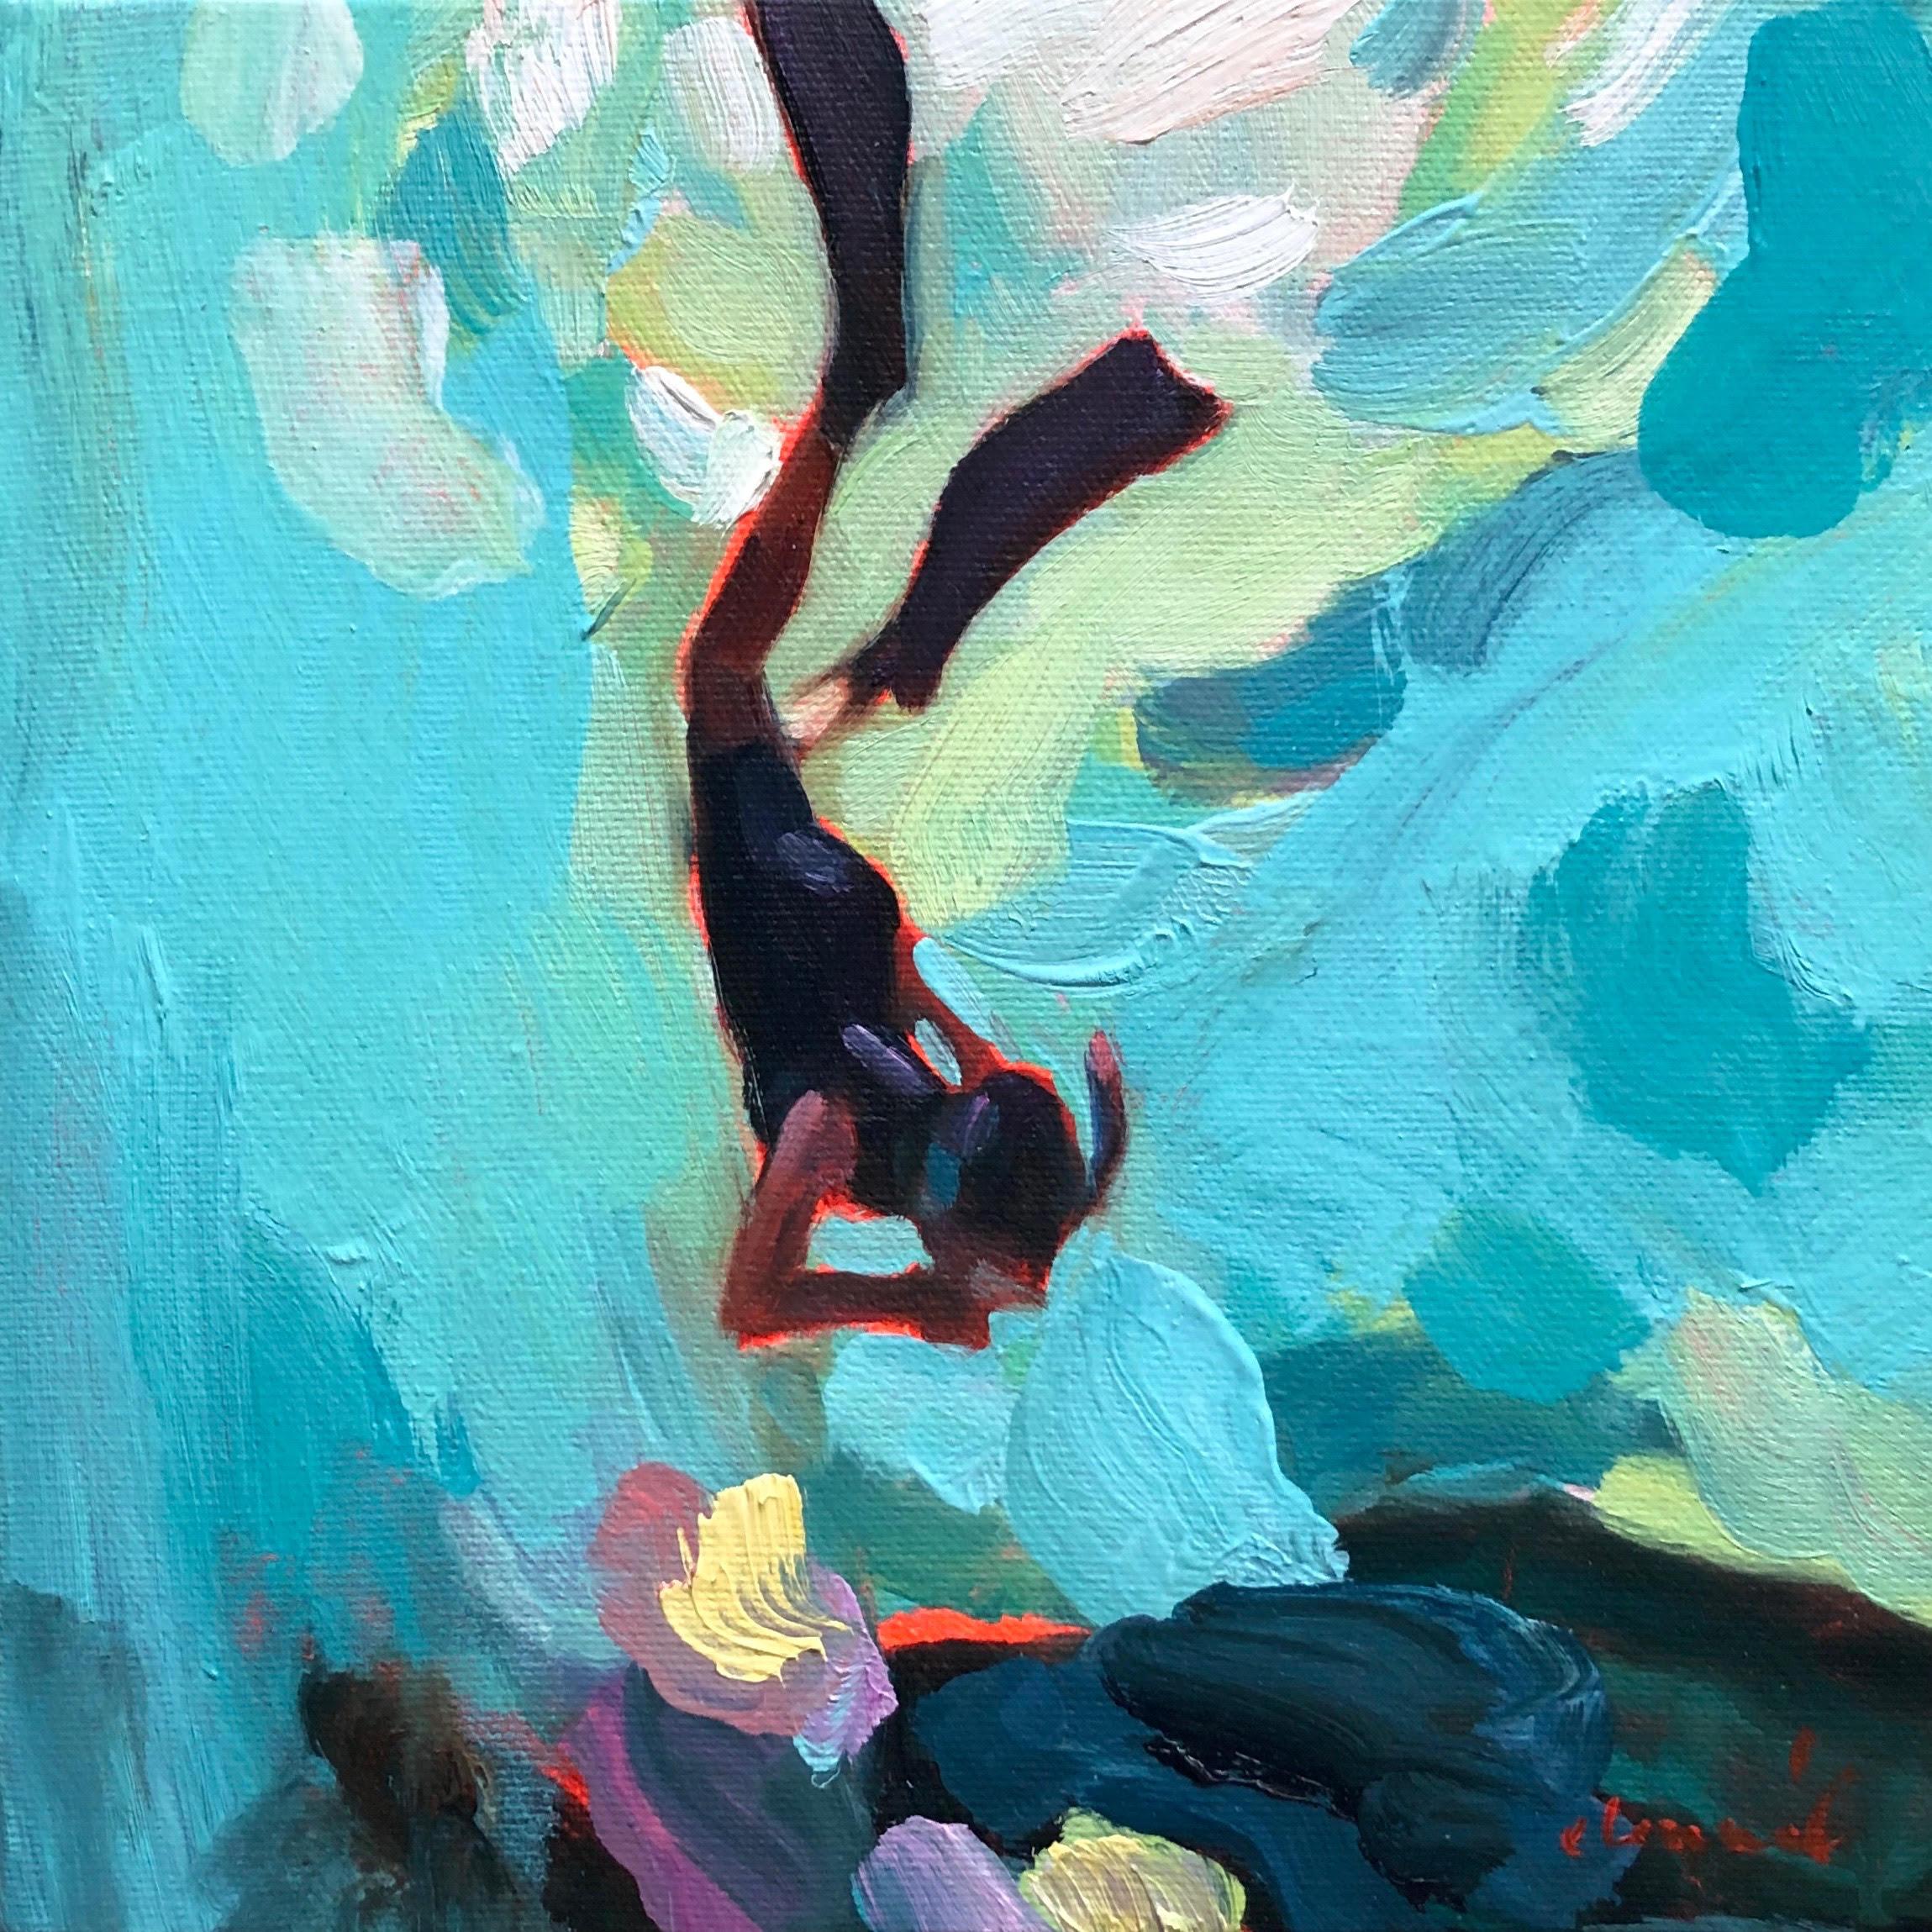 Elizabeth Lennie Figurative Painting - "Mythography 171" oil painting of a free diver swimming in turquoise water